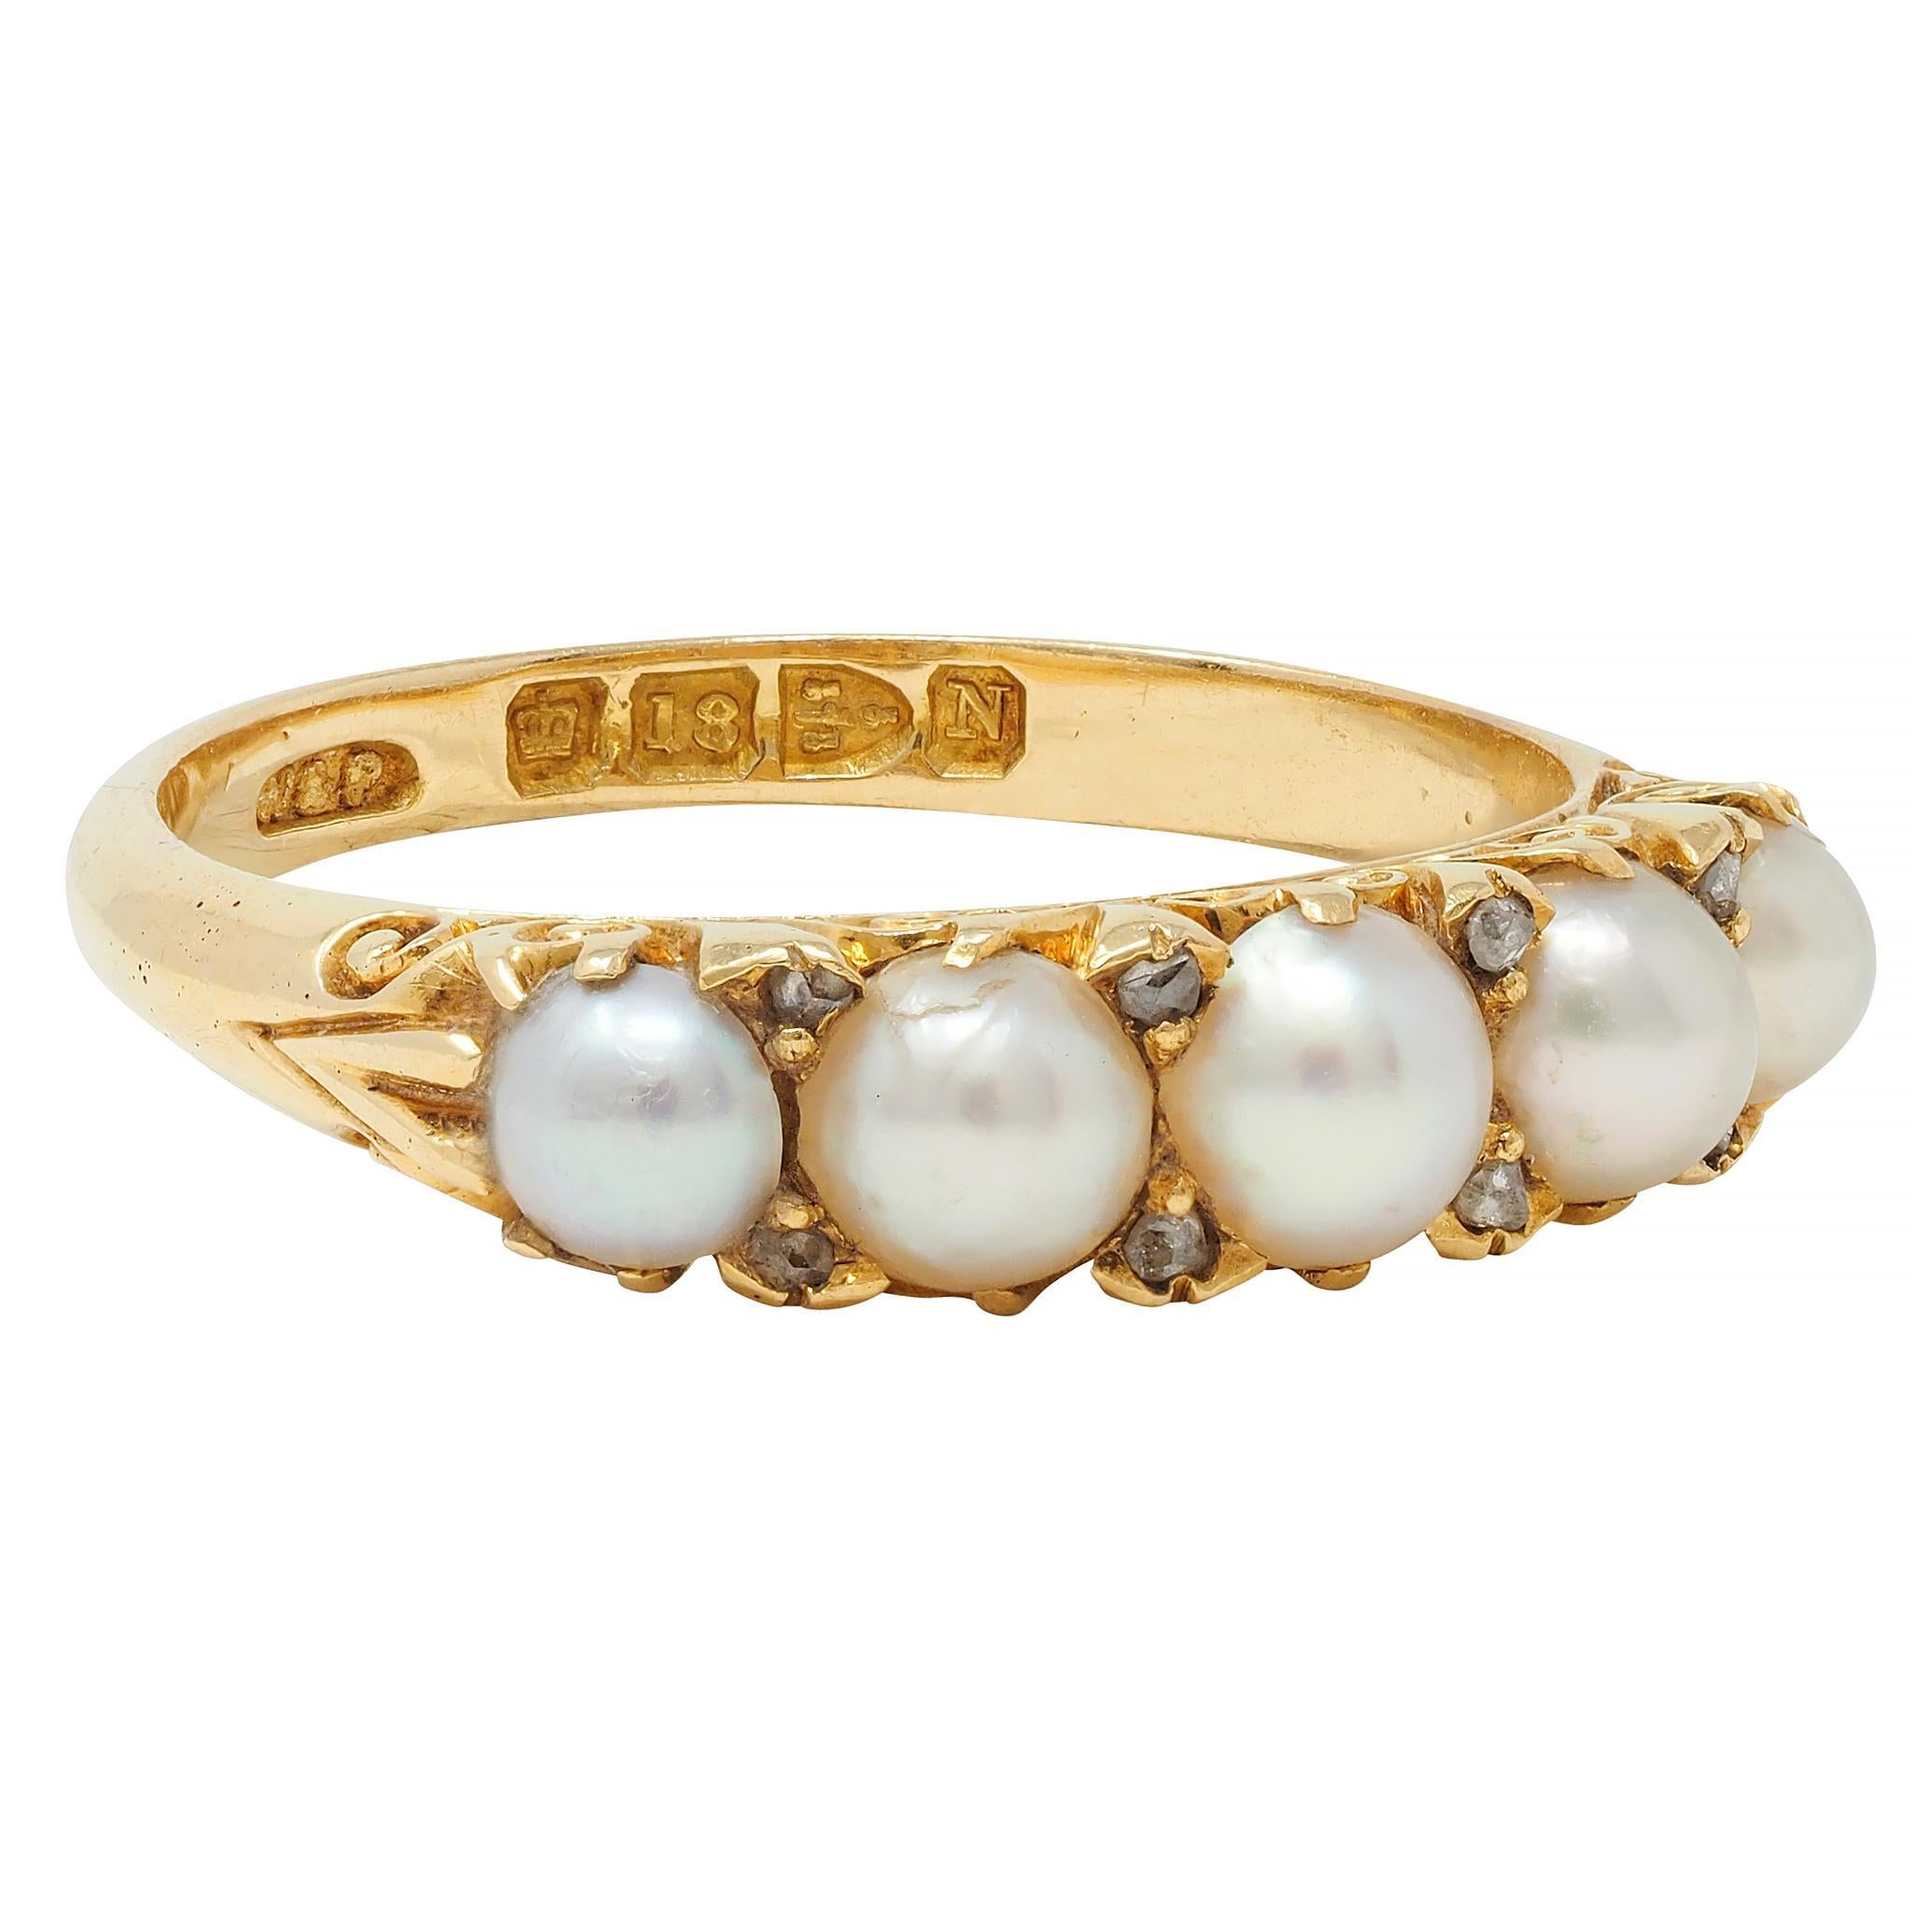 Featuring five graduated round pearls ranging from 3.5 to 4.5 mm 
Light cream and gray in body color with strong iridescence 
Prong set with rose cut diamonds bead set in-between
Weighing approximately 0.08 carat total - eye clean and